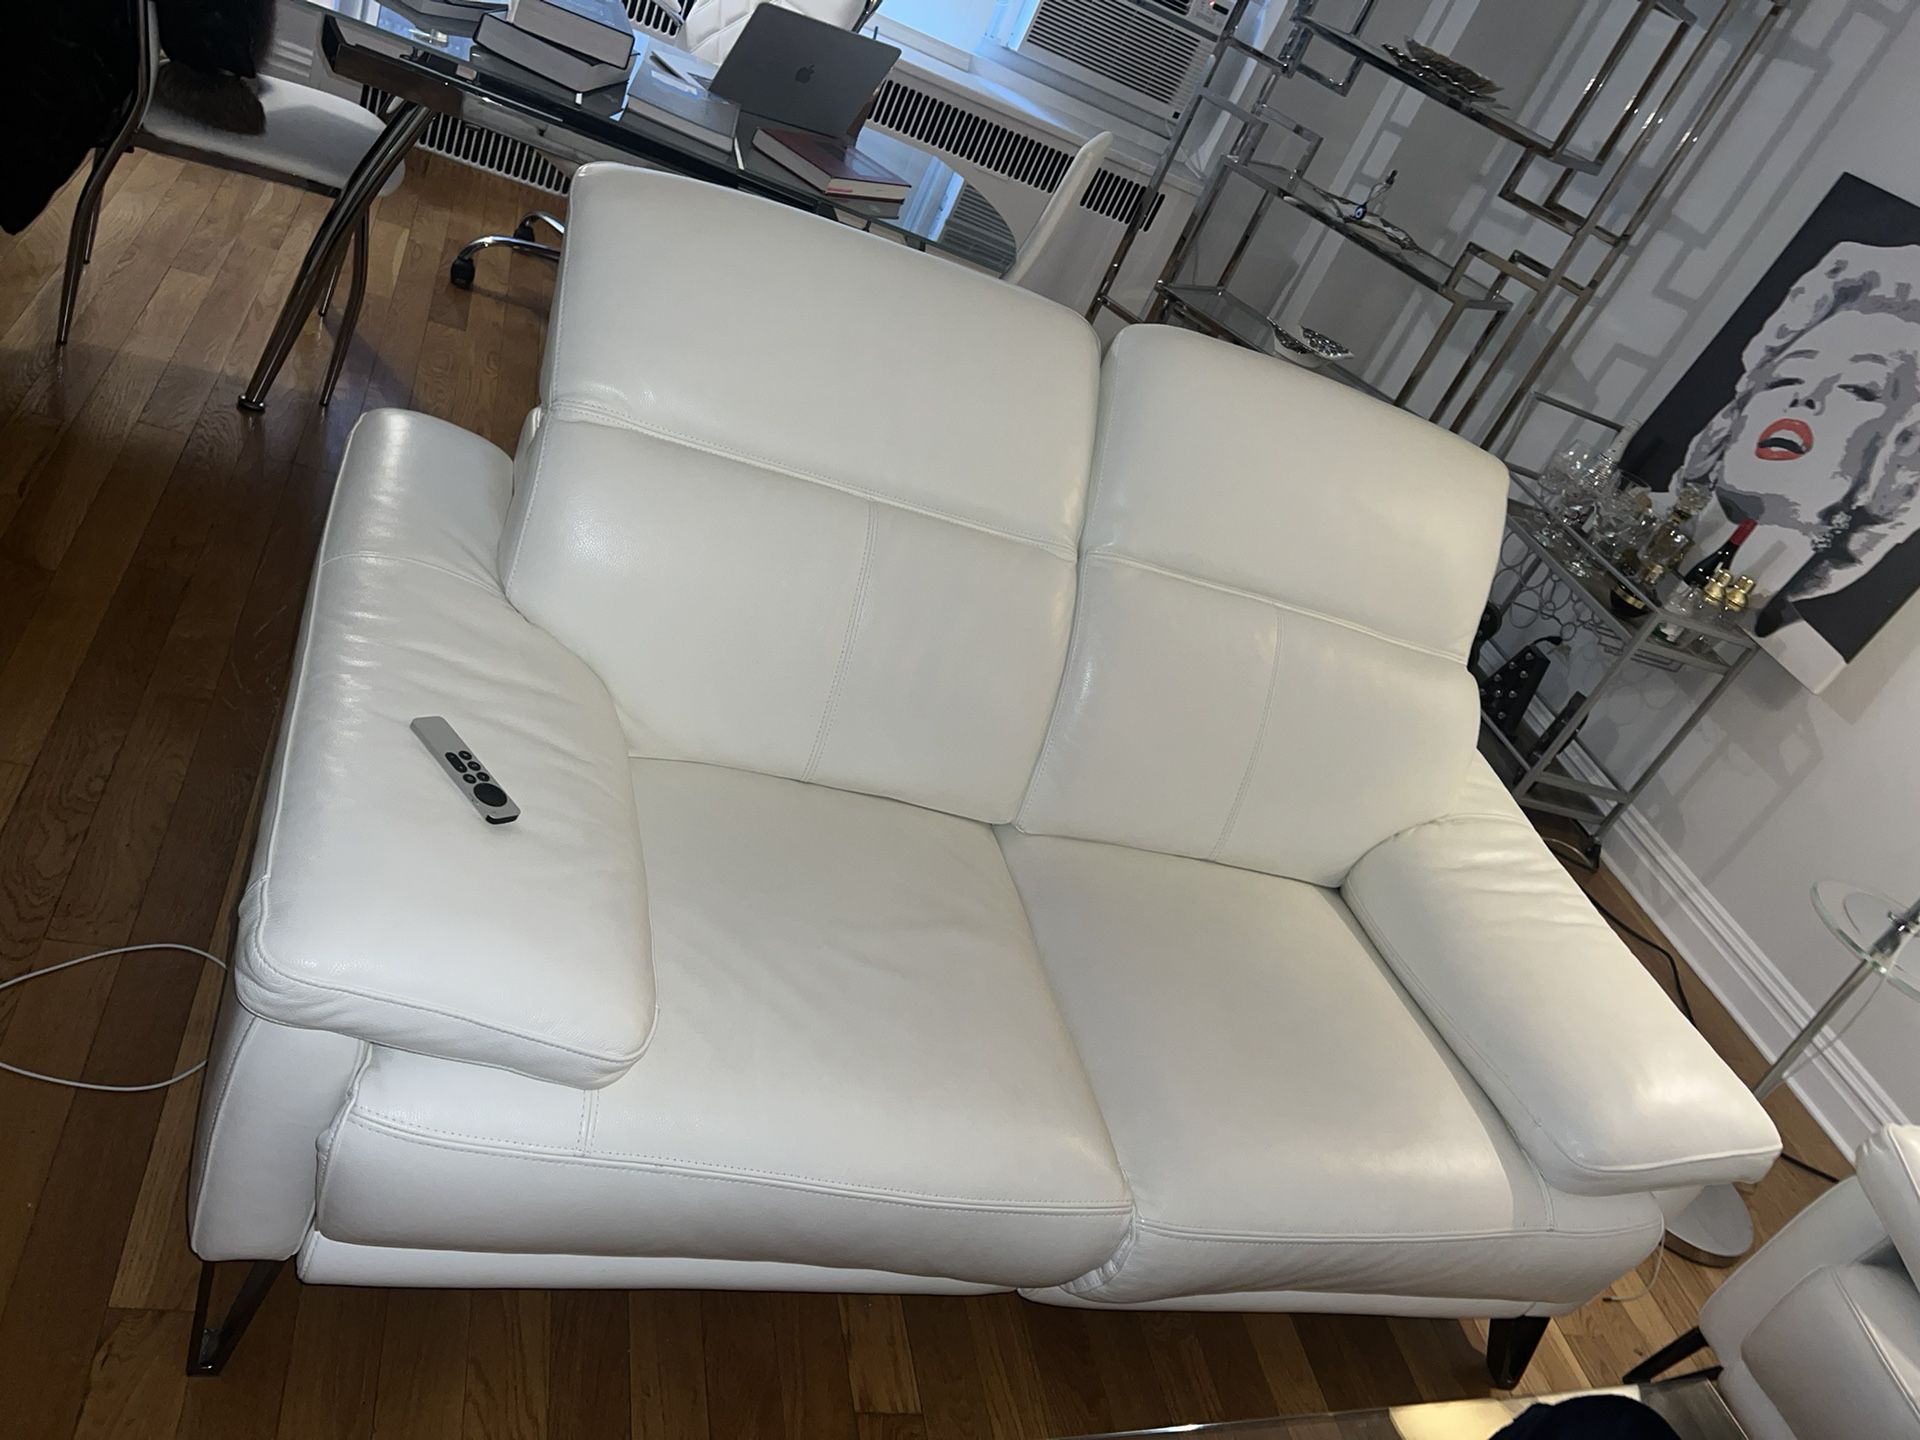 WHITE LEATHER COUCH 2 Seater